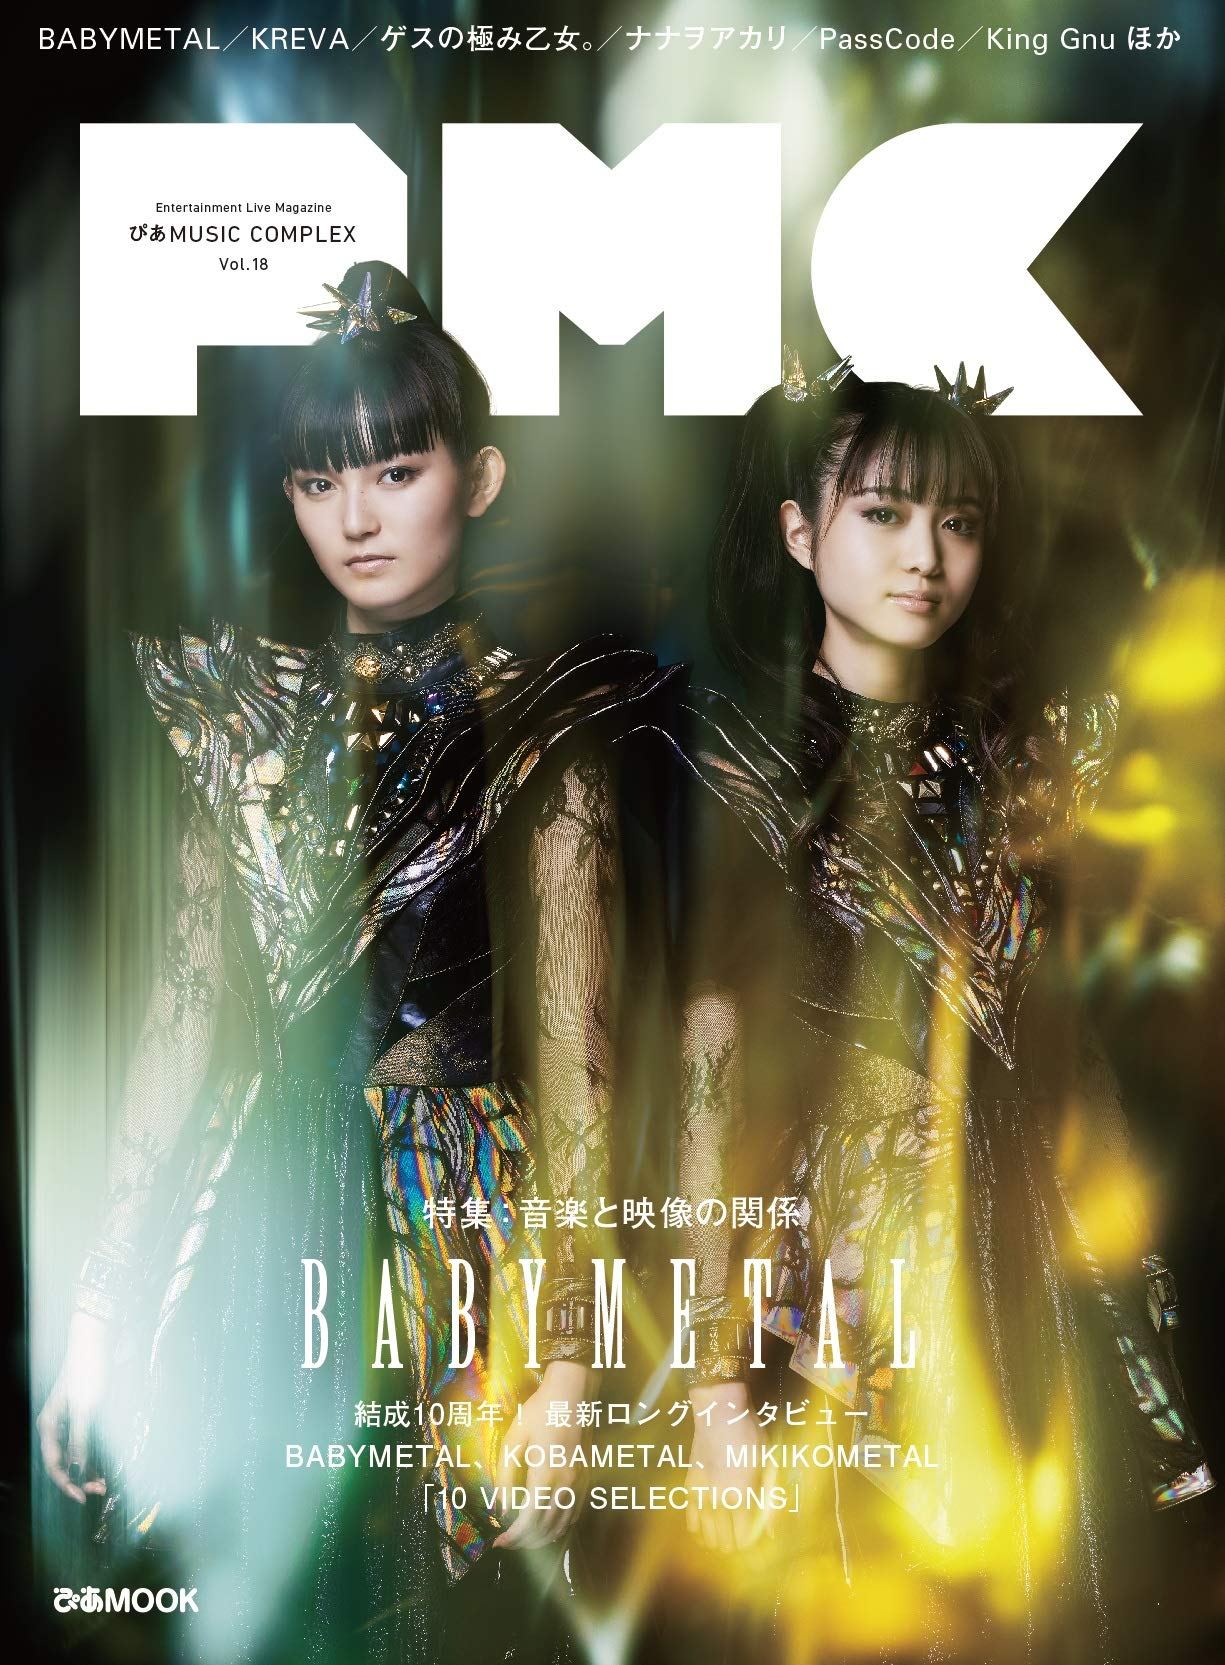 COINS　Vol.18　Complex　(PMC)　DOUBLE　Pia　Babymetal]　Music　[Cover: